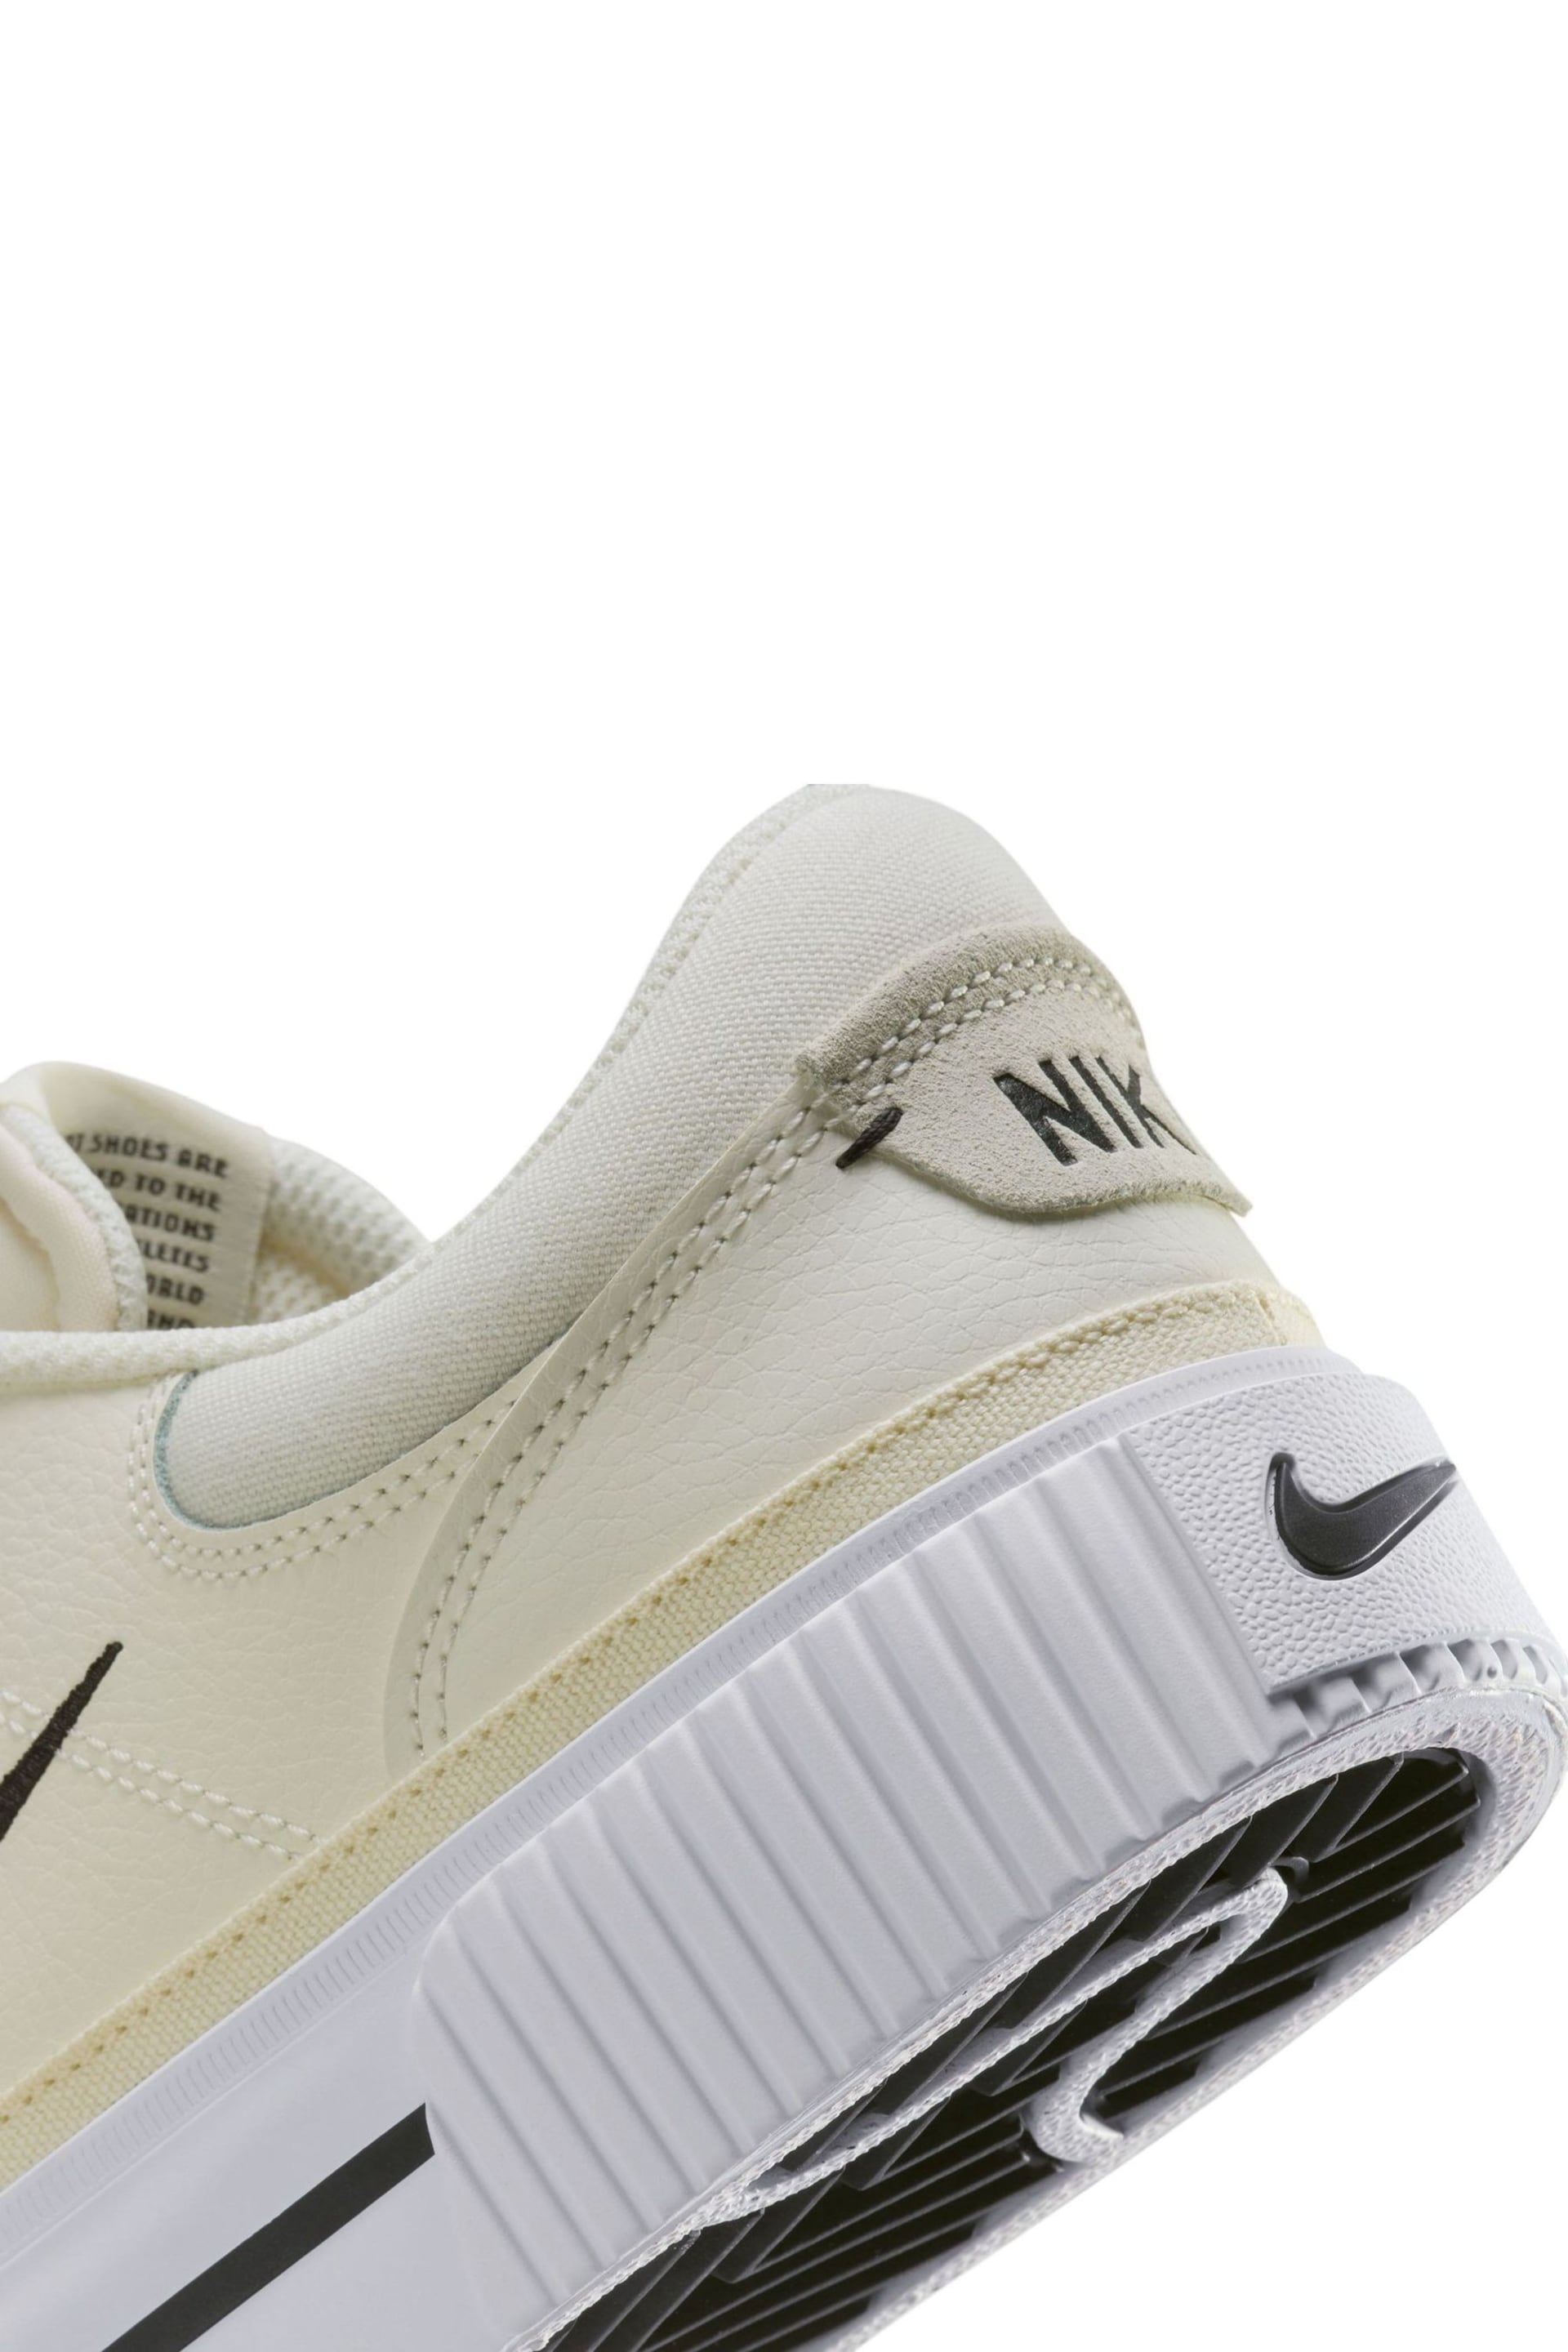 Nike White cream Court Legacy Lift Trainers - Image 12 of 14